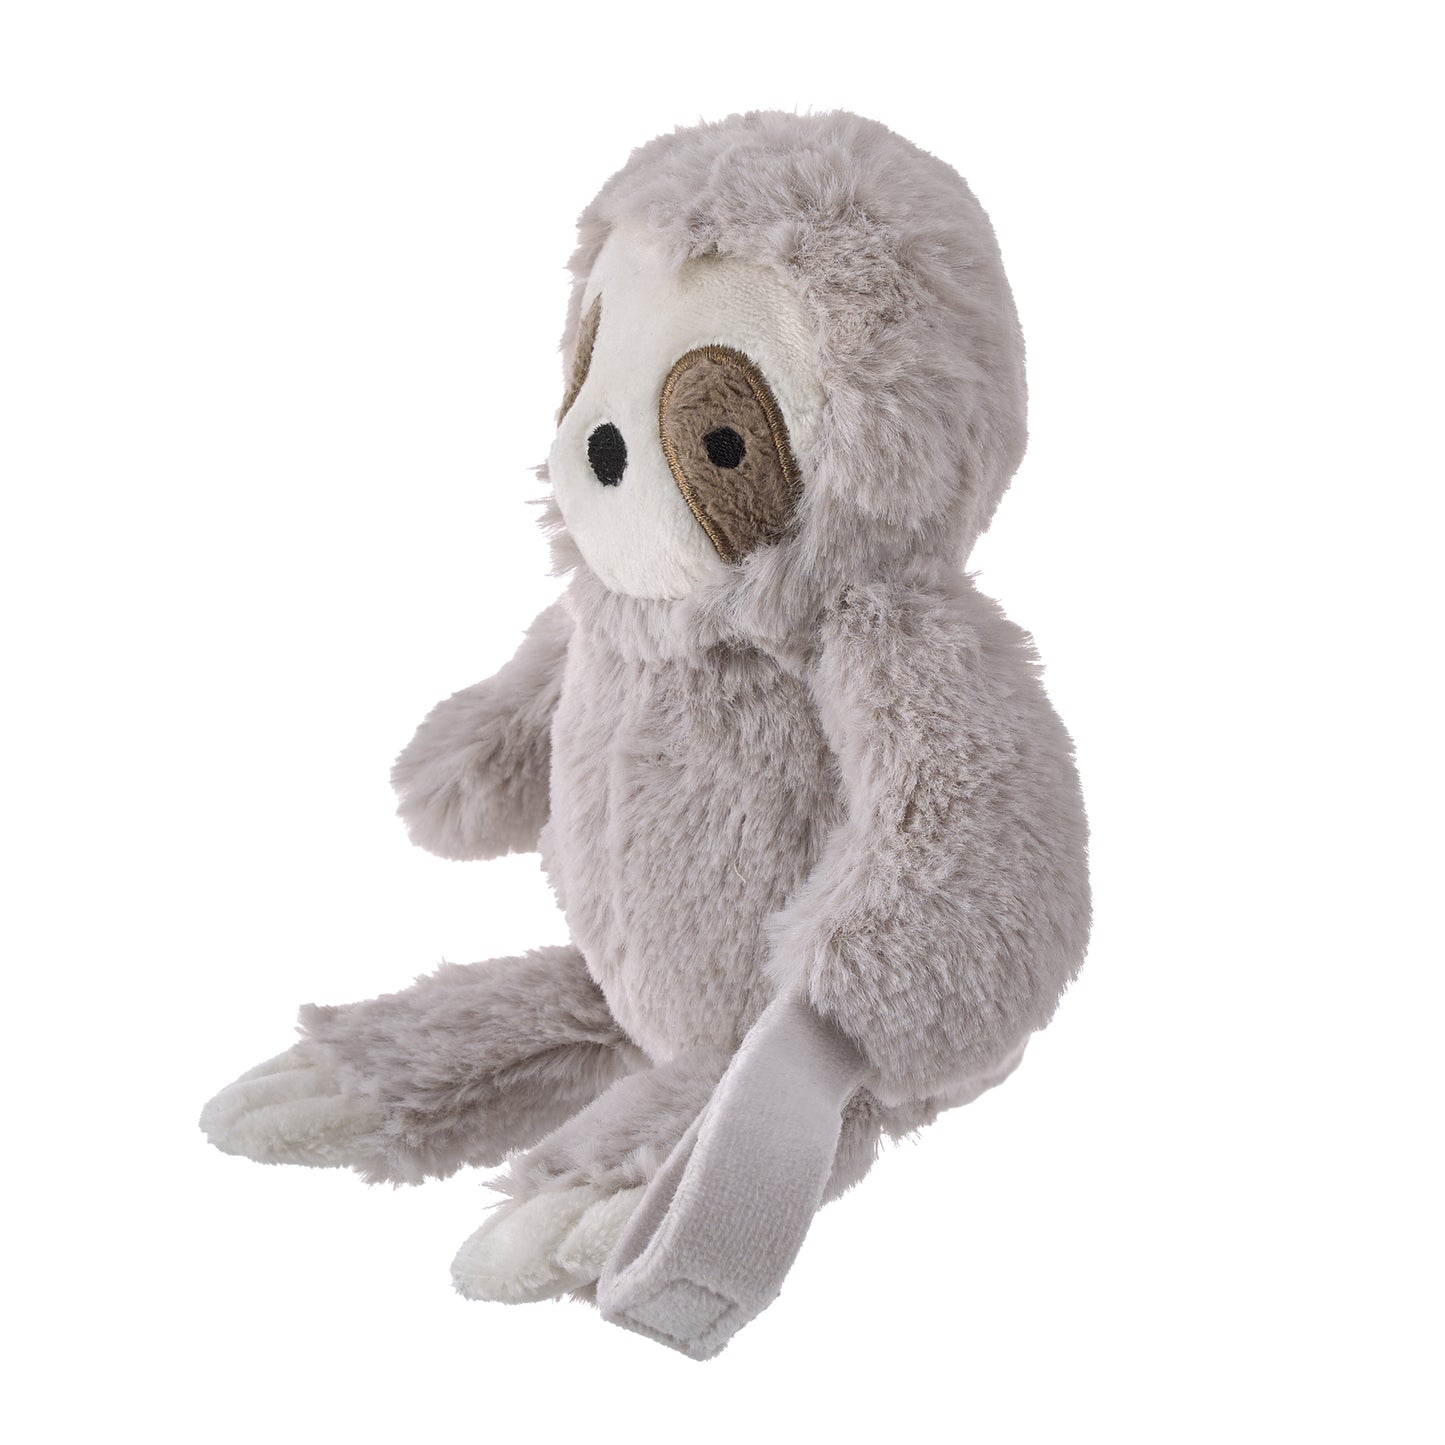 Little Love by NoJo Sloth Shaped Grey and White Plush Pacifier Buddy